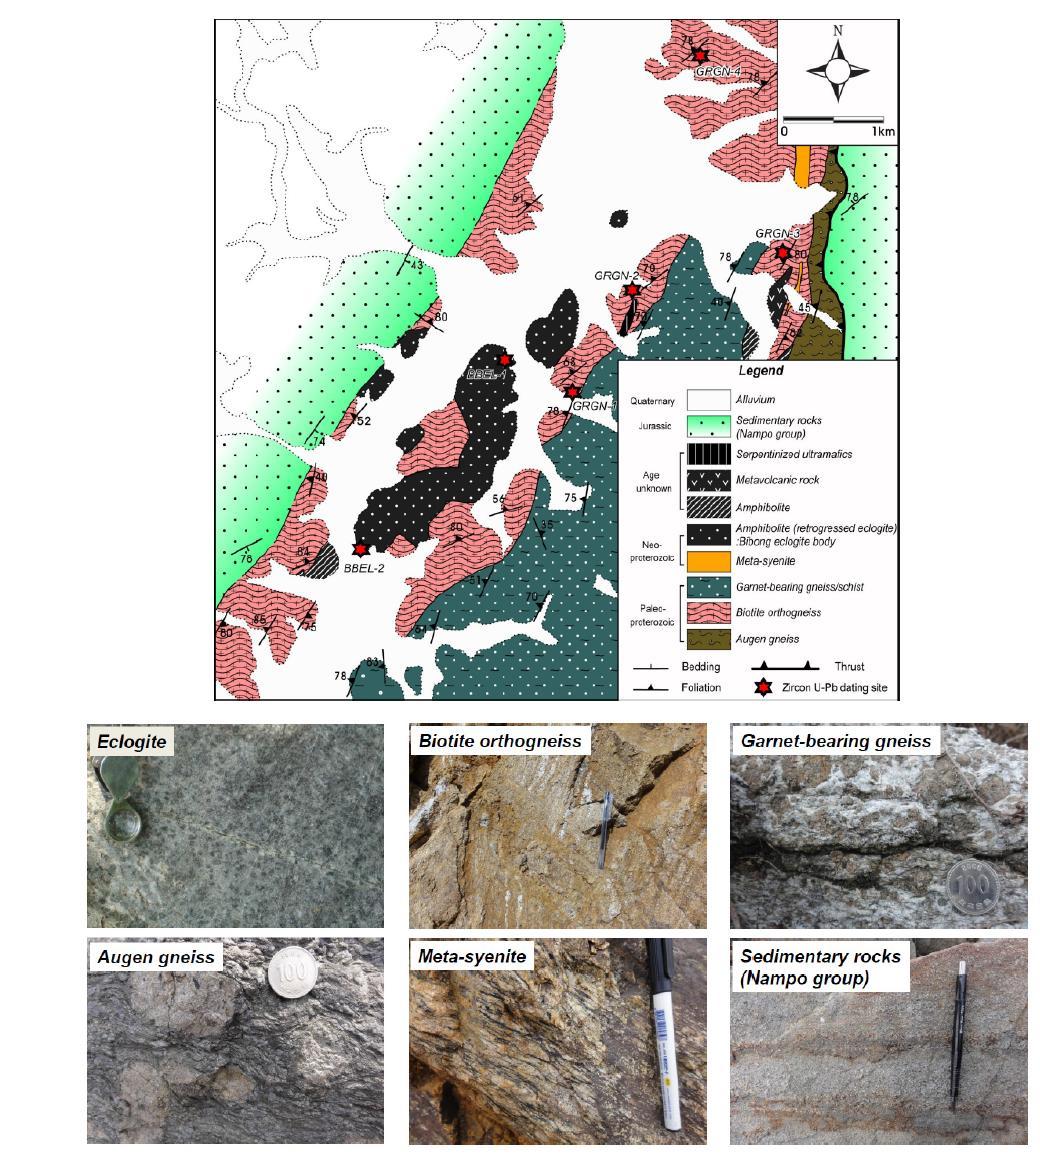 Most part of the Bibong eclogite body is strongly retrogressed into amphibolite, although the eclogite–facies metamorphic rocks are partially preserved as isolated pockets.